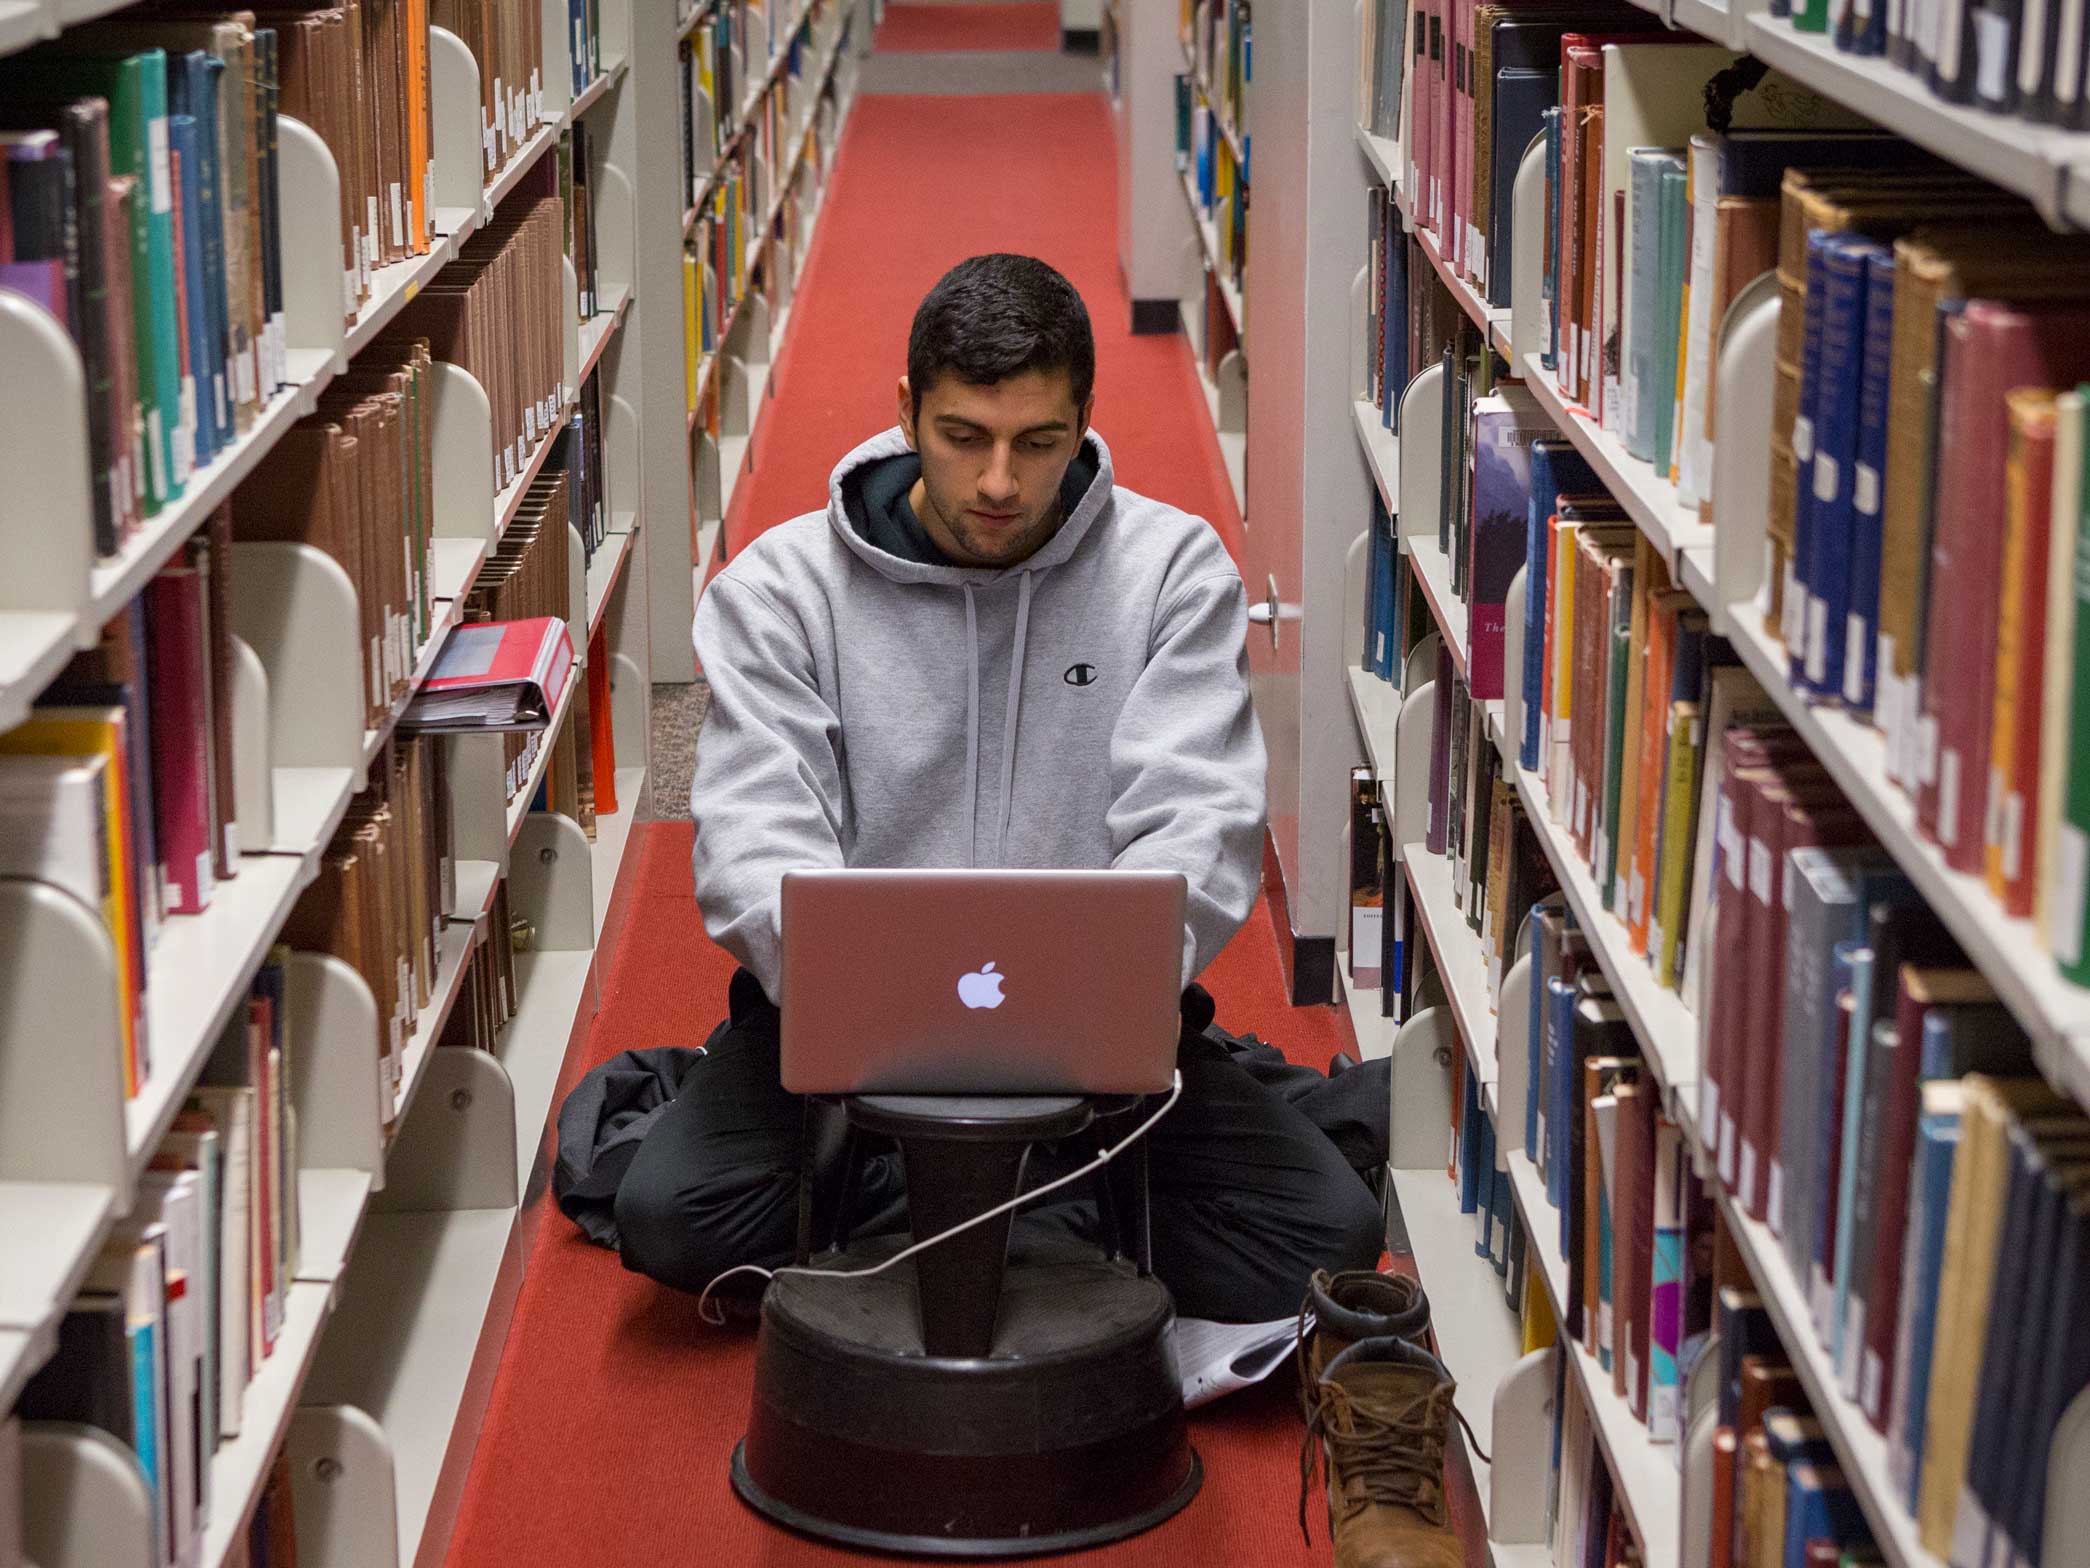 Student using a computer in library stacks